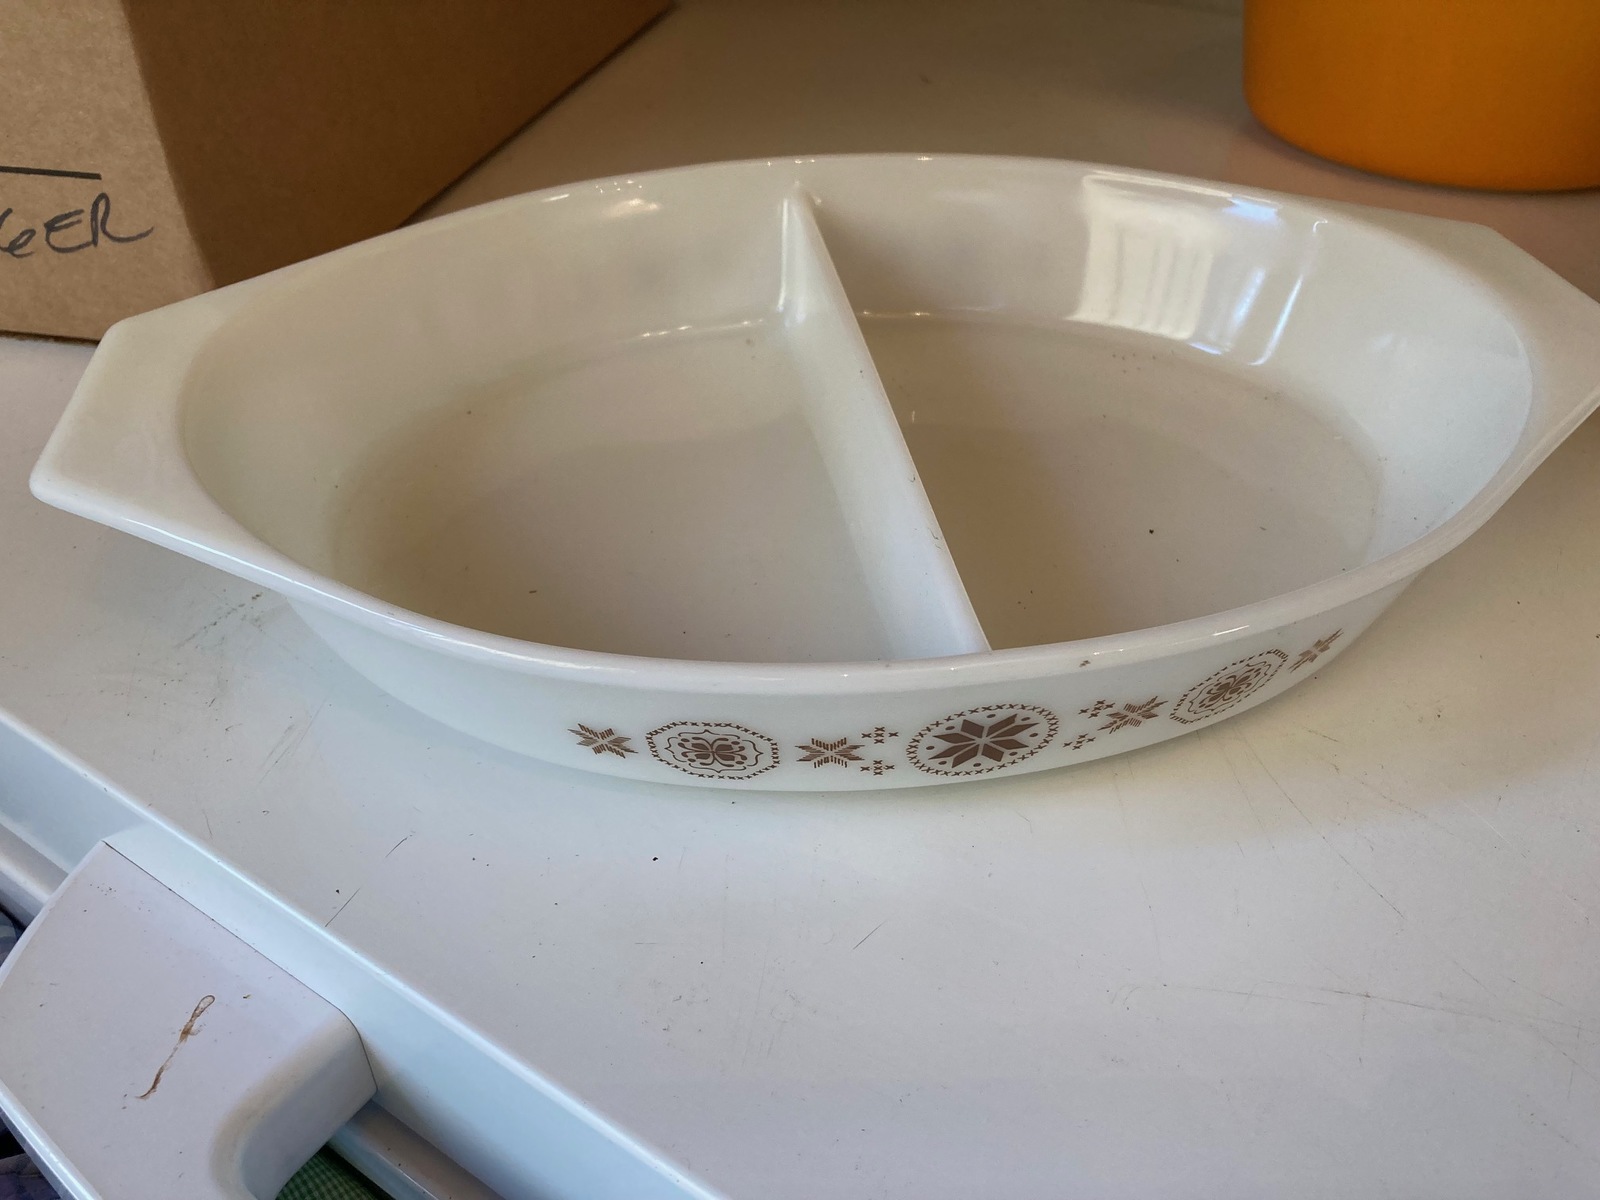 Pyrex oval divided baking dish - $12.00